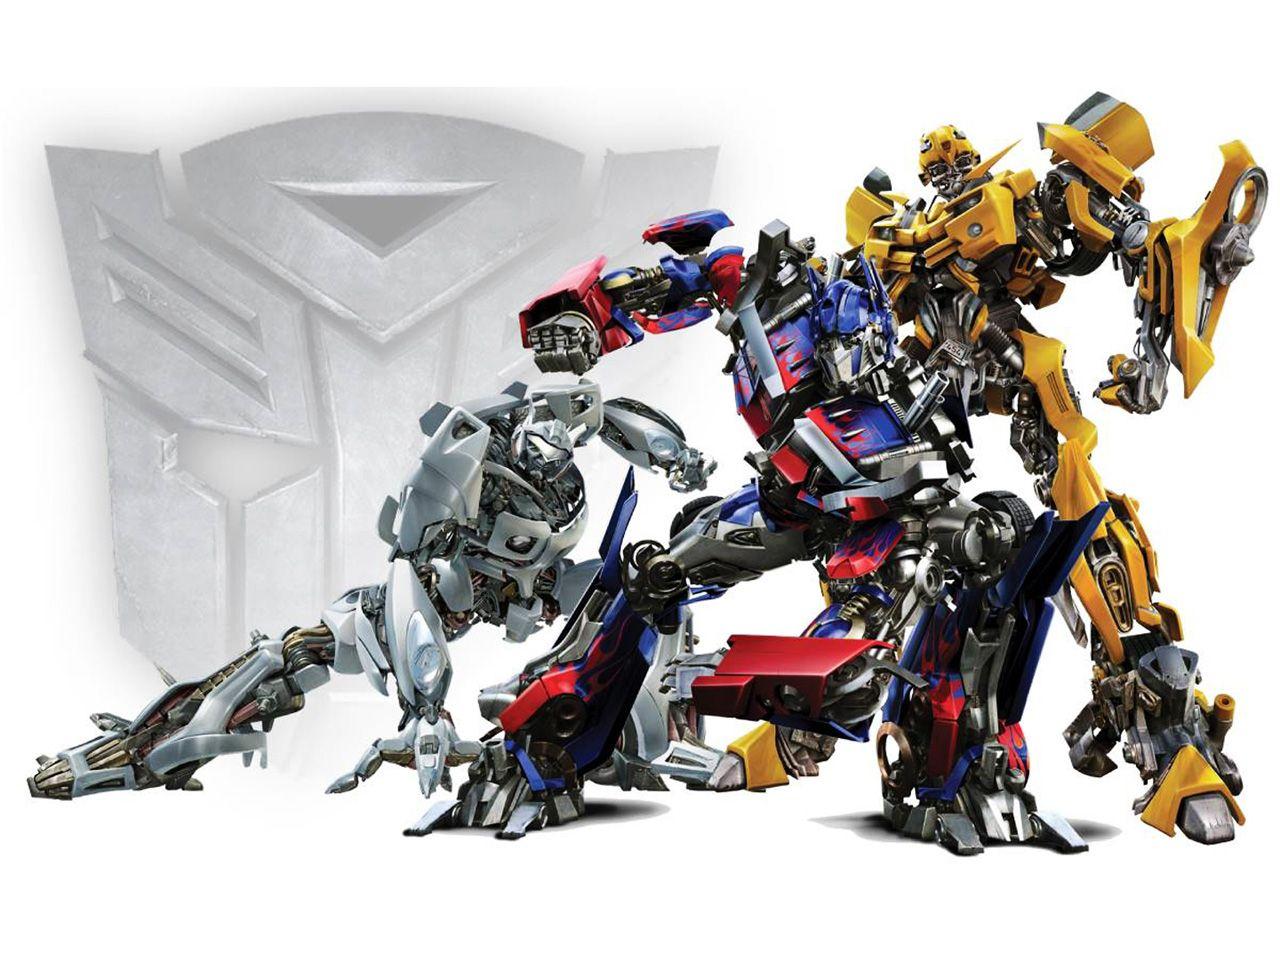 Cool Transformers Wallpaper. WALLPAPERS OF TRANSFORMERS cool